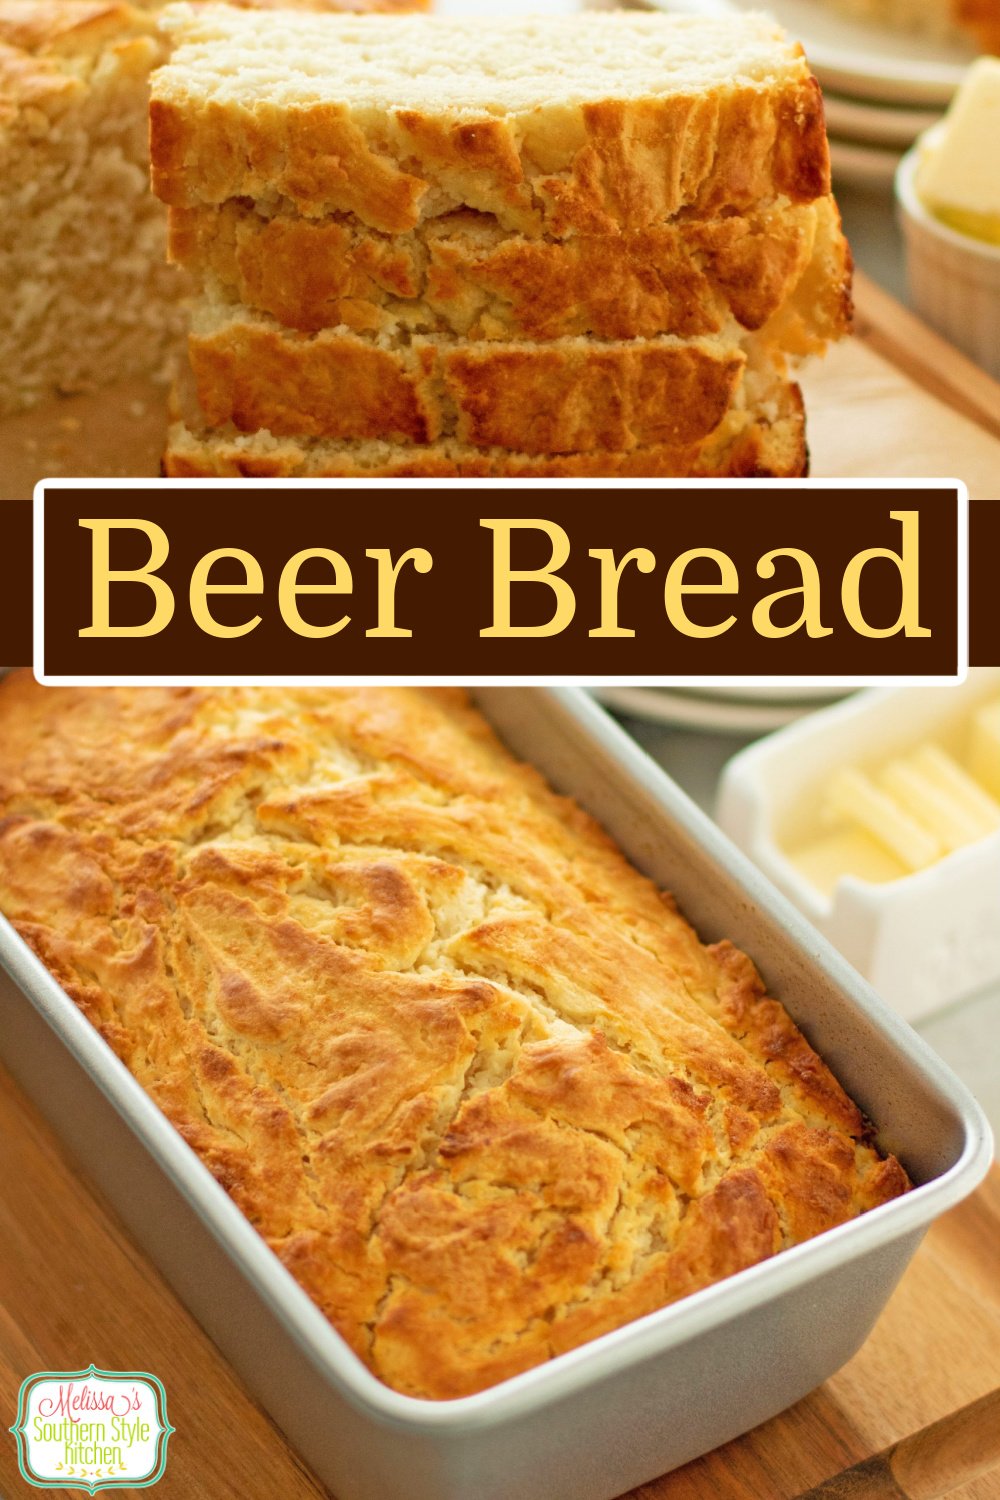 This homemade Beer Bread Recipe only requires 4 ingredients to make! #beerbread #easybreadrecipes #breadrecipes #baking #beerrecipes #bread #easybeerbread via @melissasssk